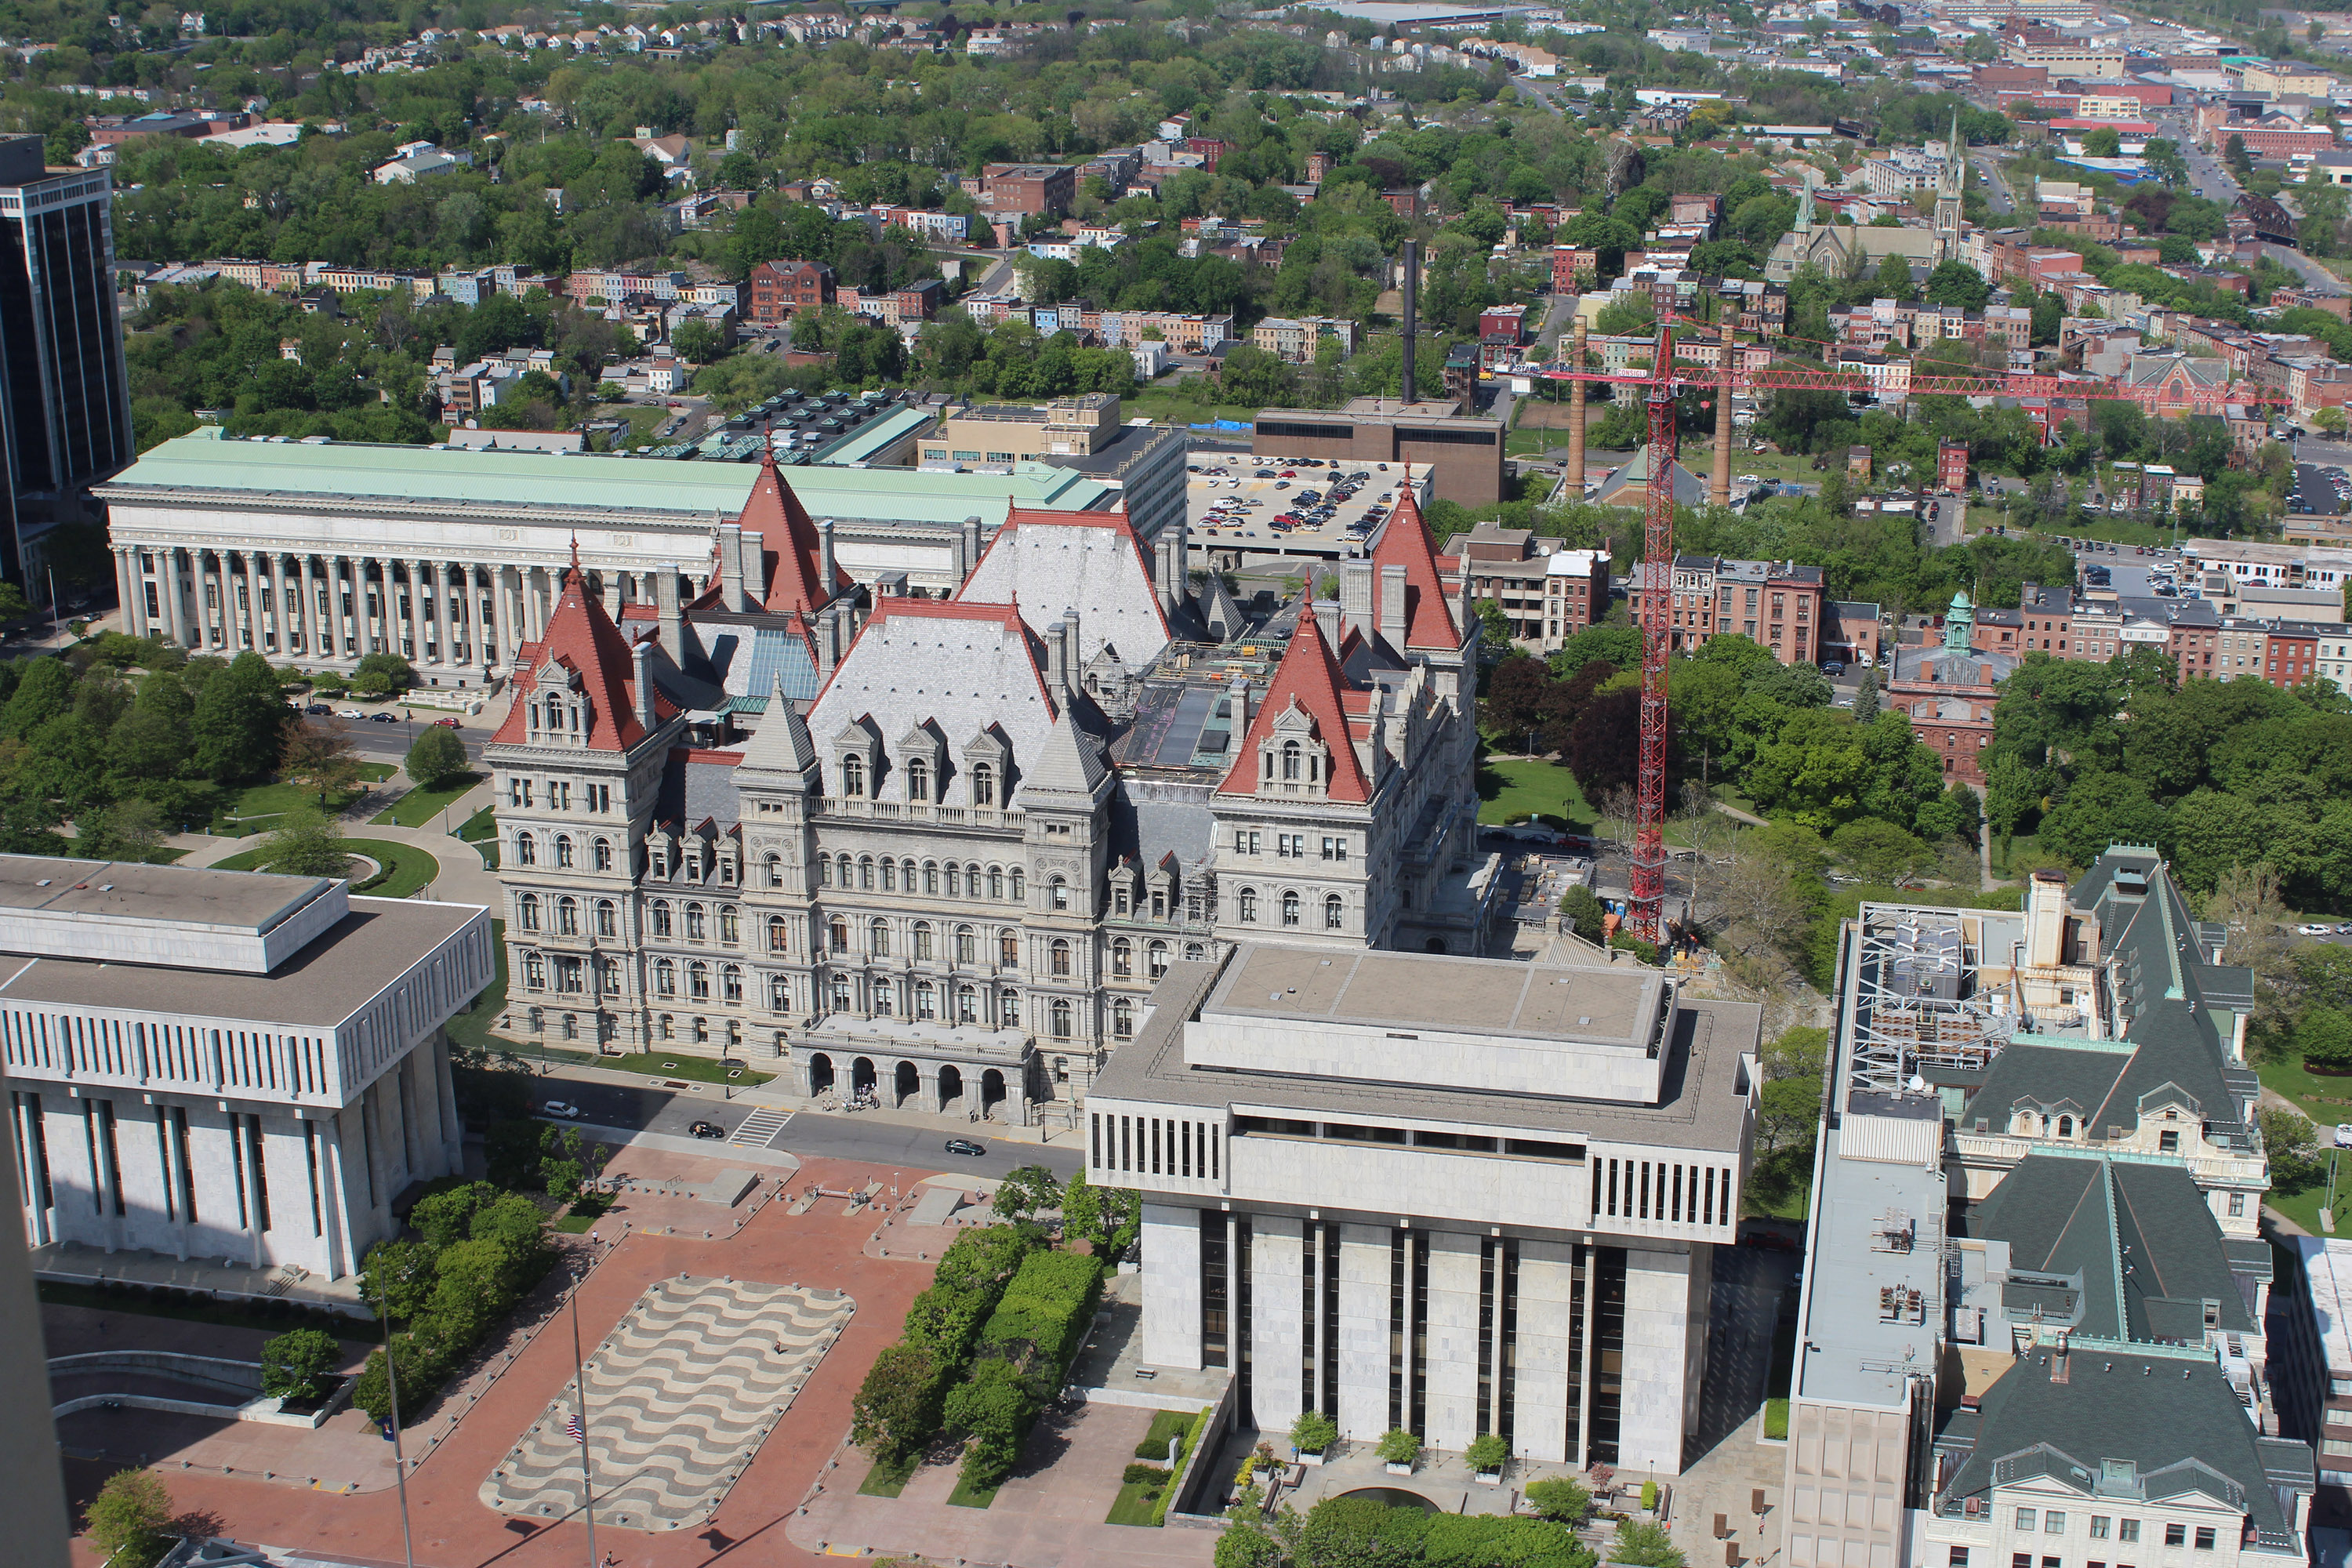 New York State Capitol. Viewed from the Corning Tower Observation Deck